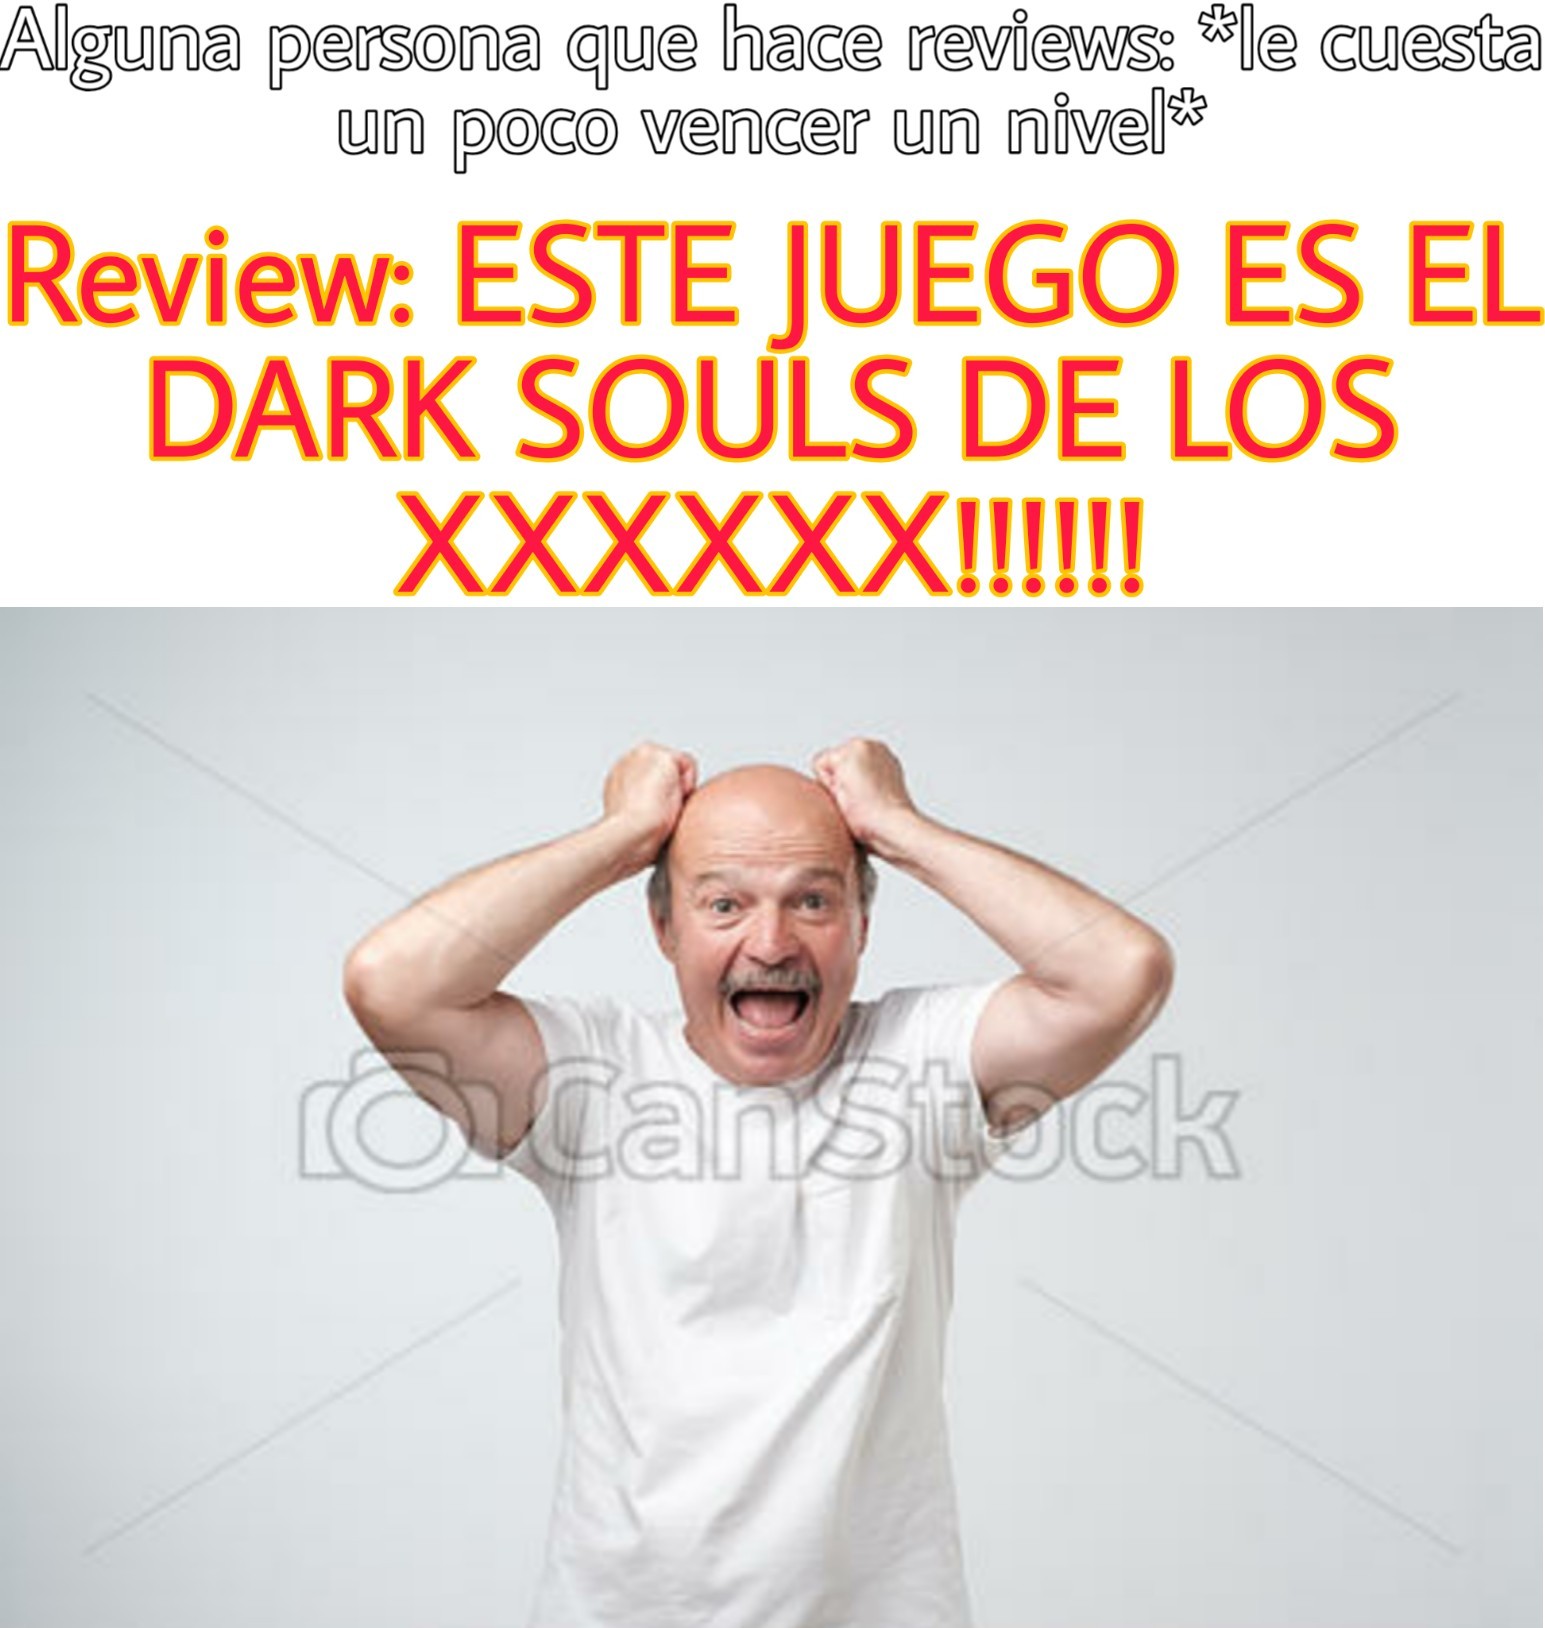 Son muy exagerados los reviewers - Change my mind - meme